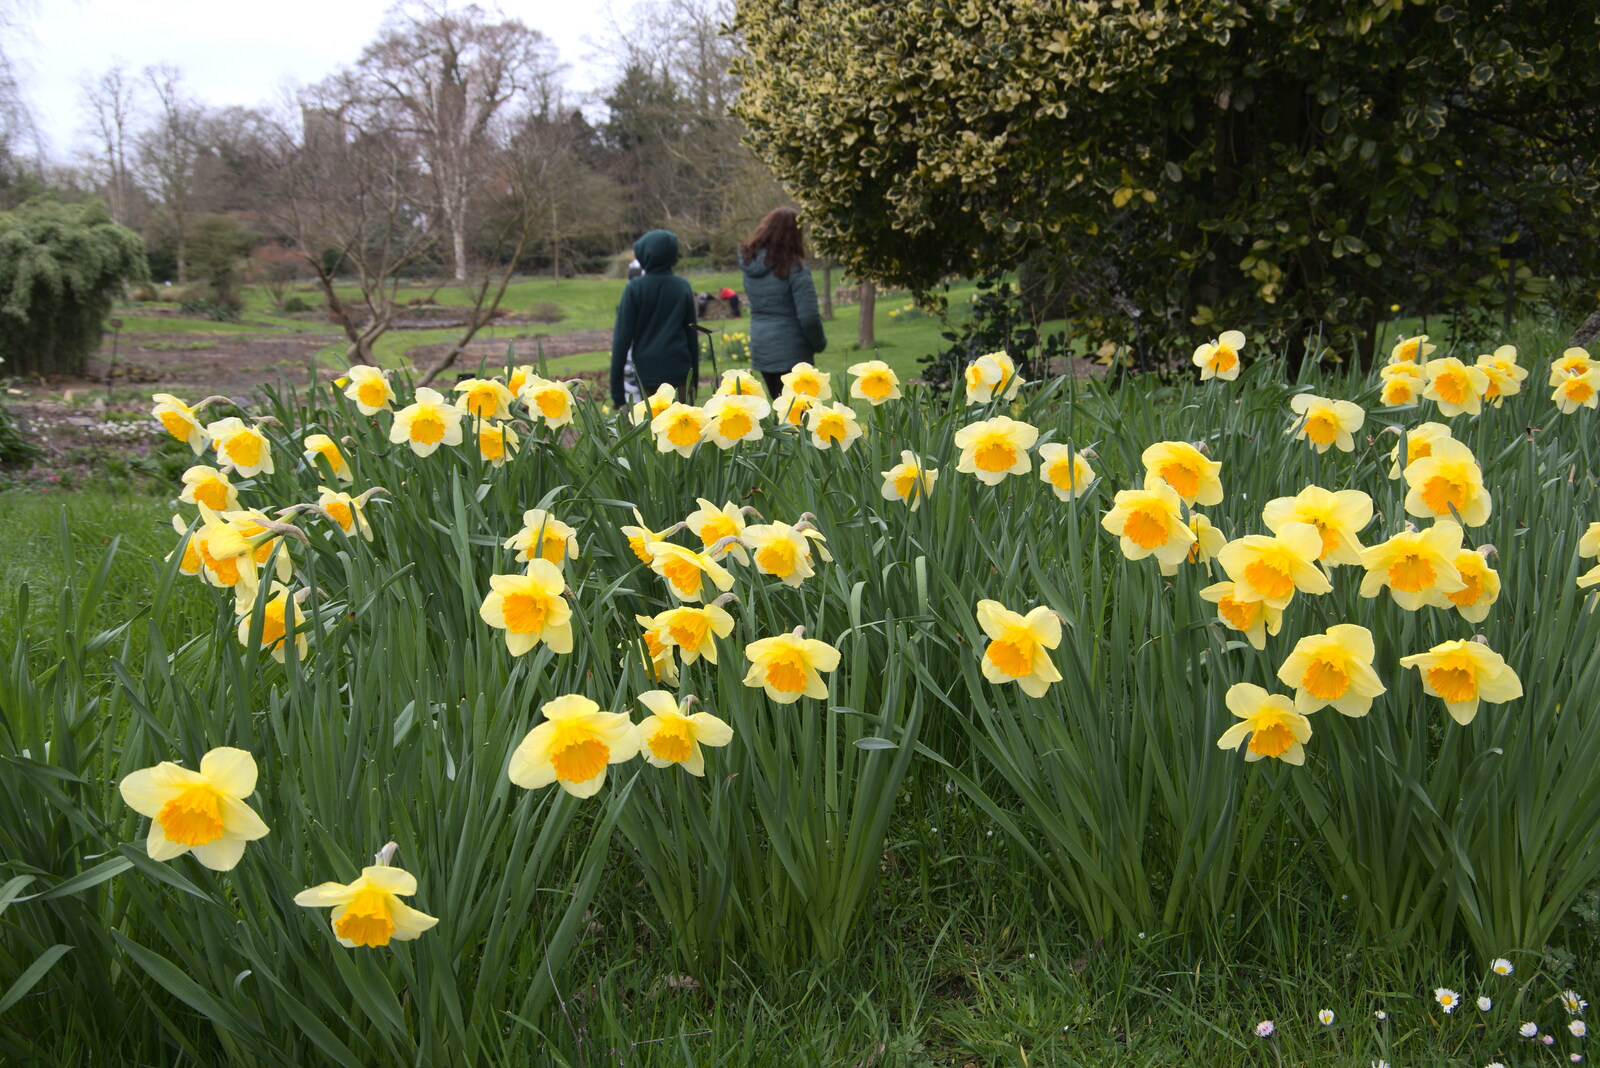 More daffodils from A Return to Bressingham Steam and Gardens, Bressingham, Norfolk - 28th March 2021